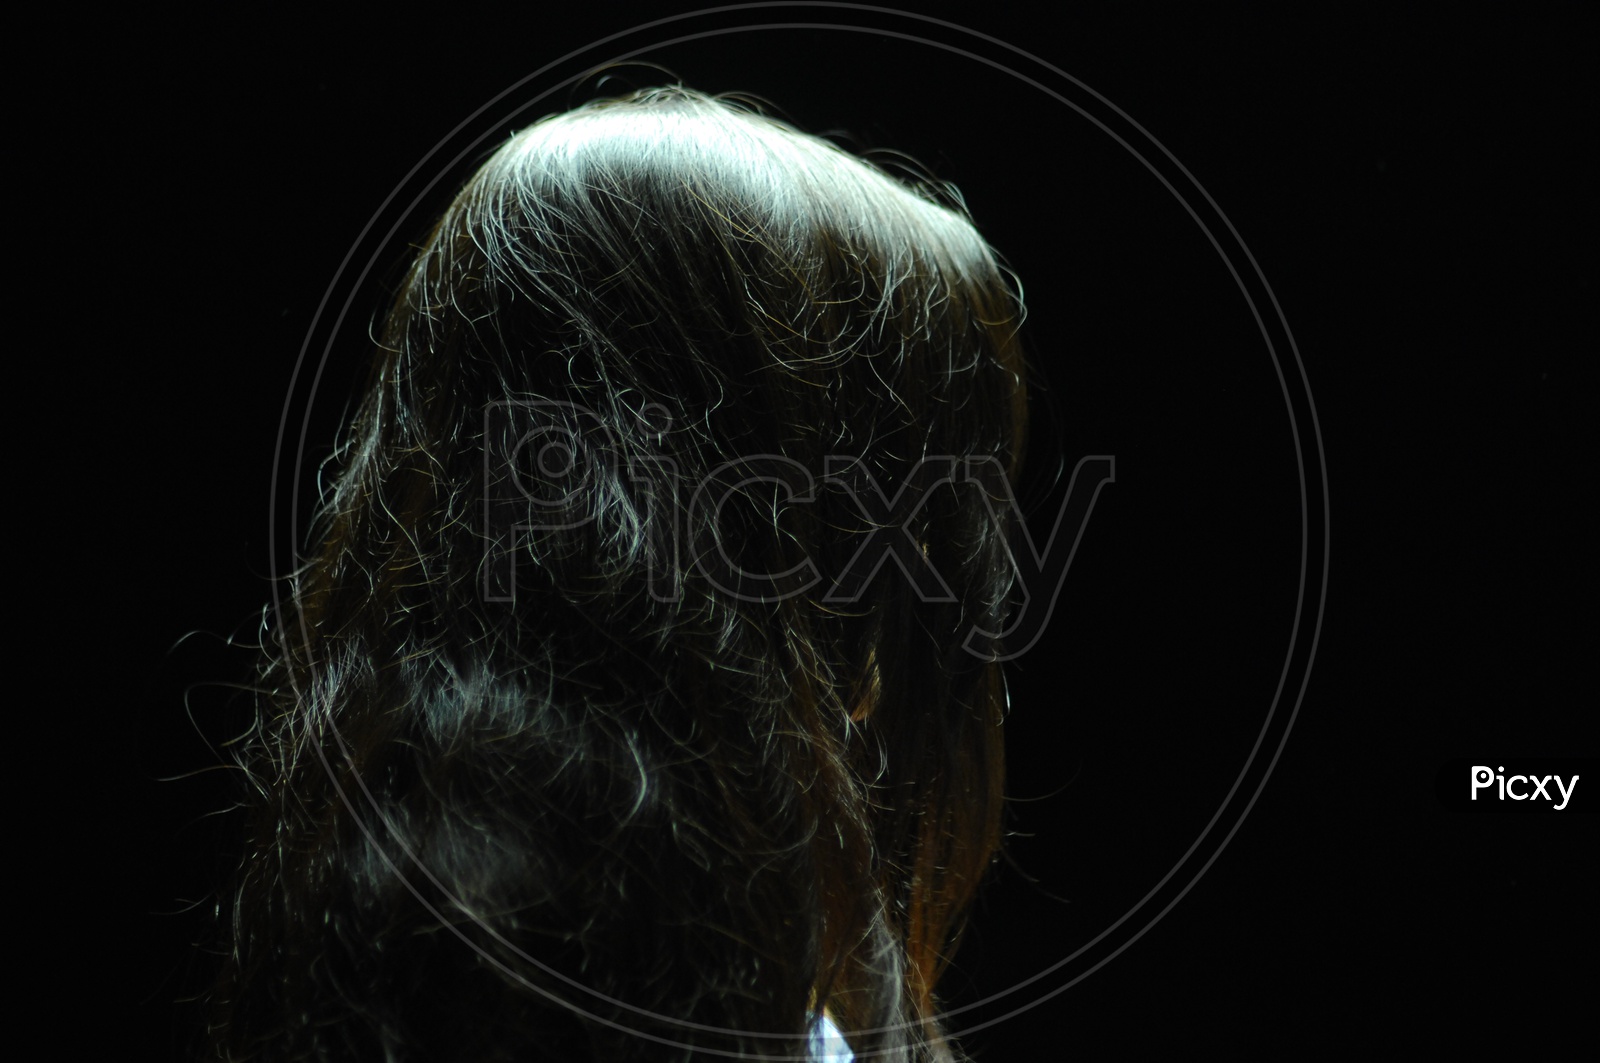 Young Indian Woman Hair. Silhouette.